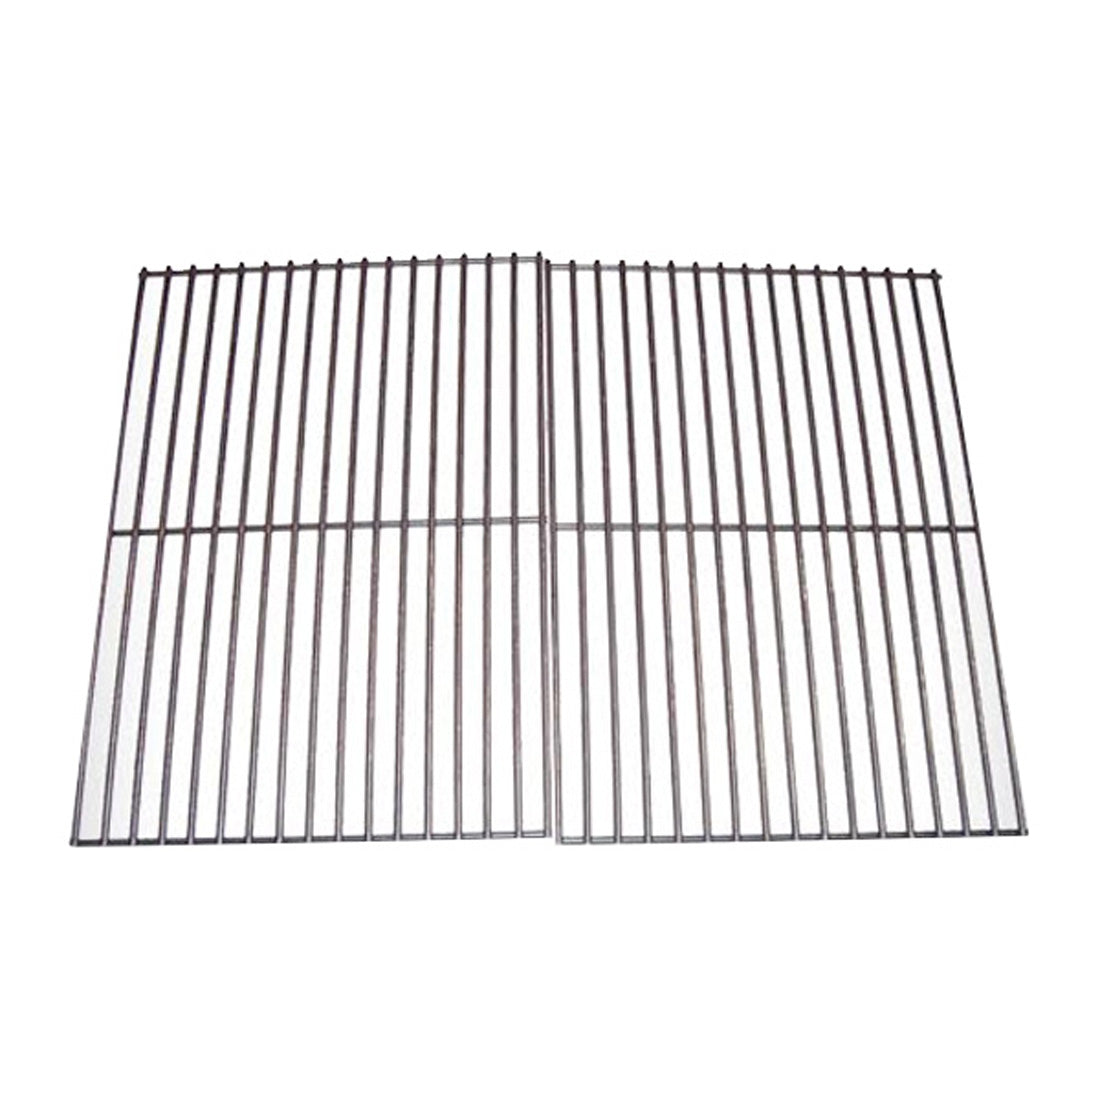 Green Mountain Grills Daniel Boone Grill Grate Stainless 2 Piece GMGP-1060